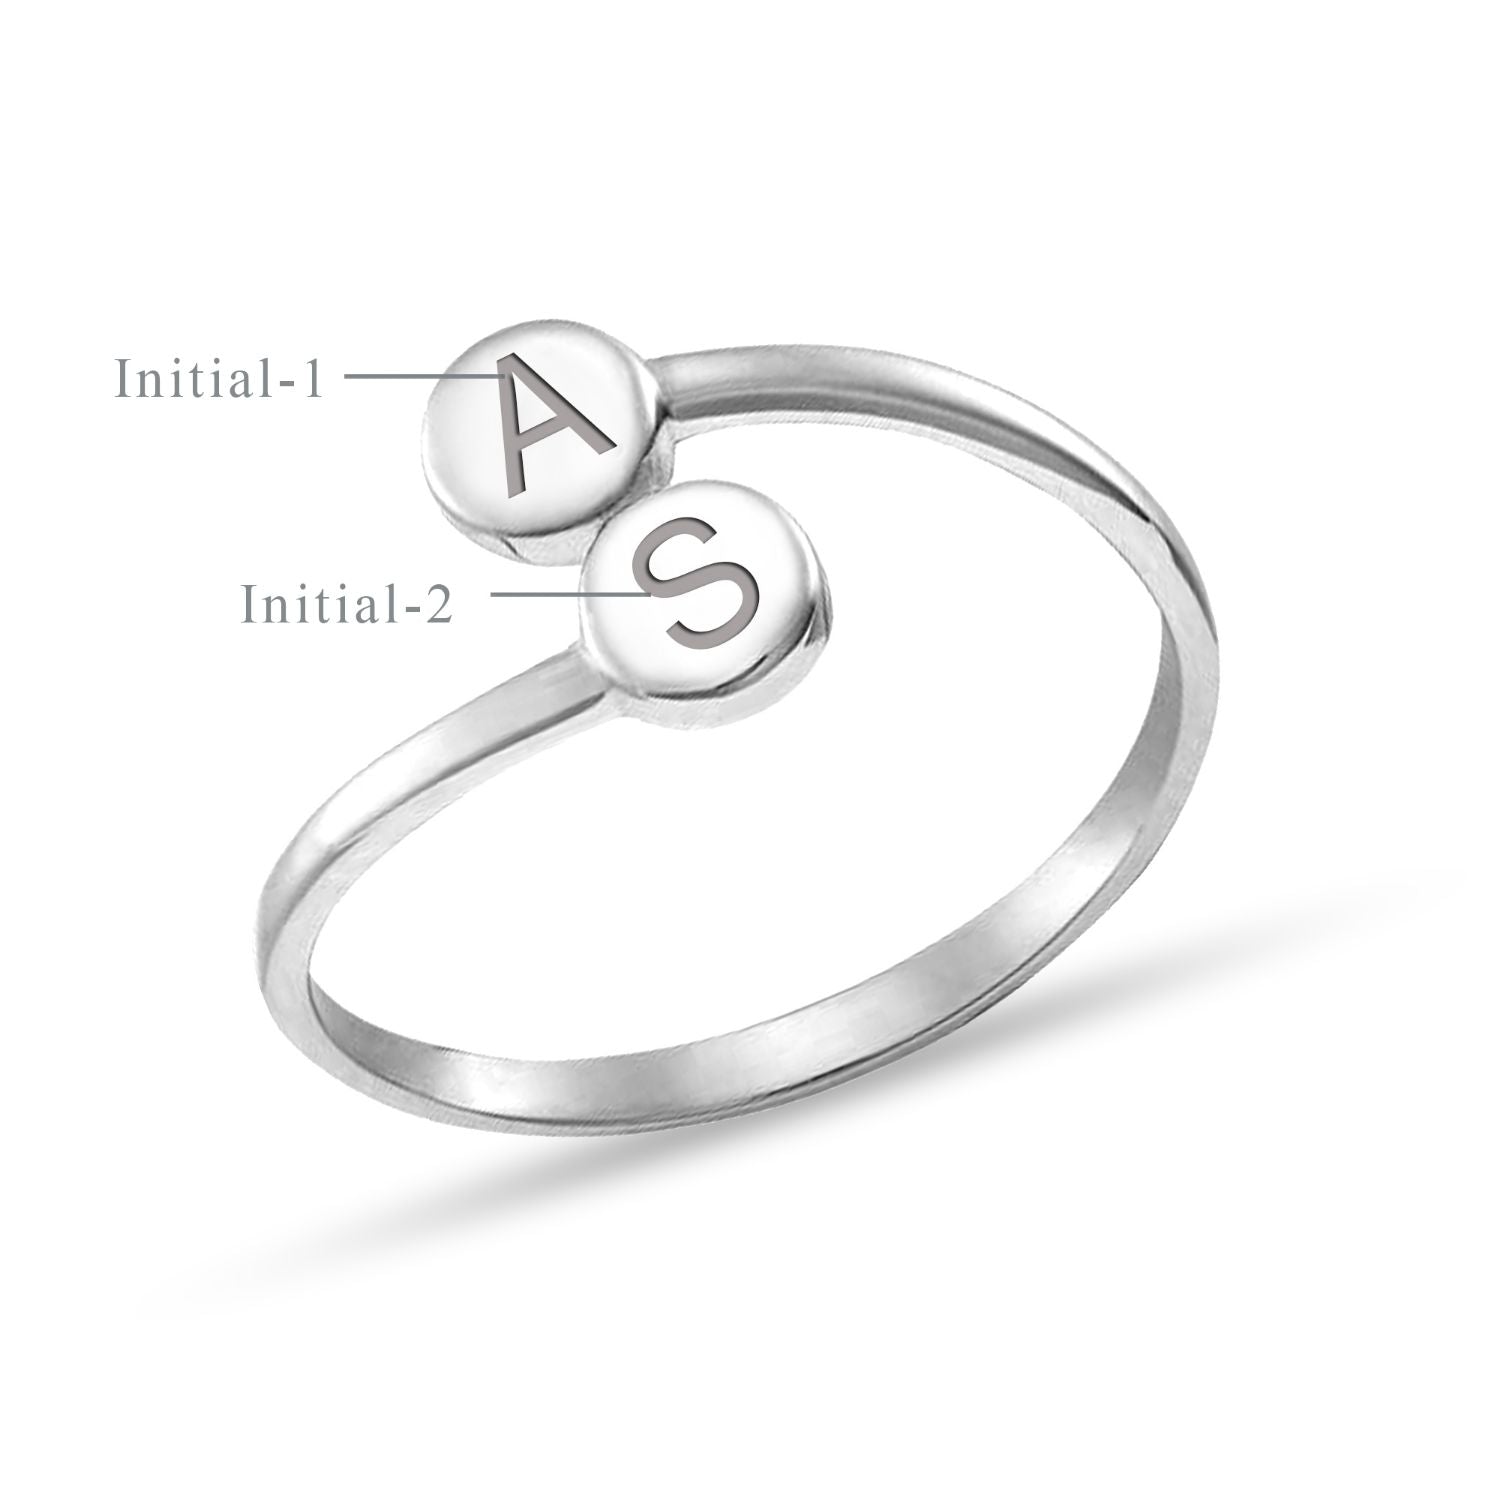 Personalised Customised 925 Sterling Silver Engraved Couple Double Disc Initial Finger Rings for Women and Girls